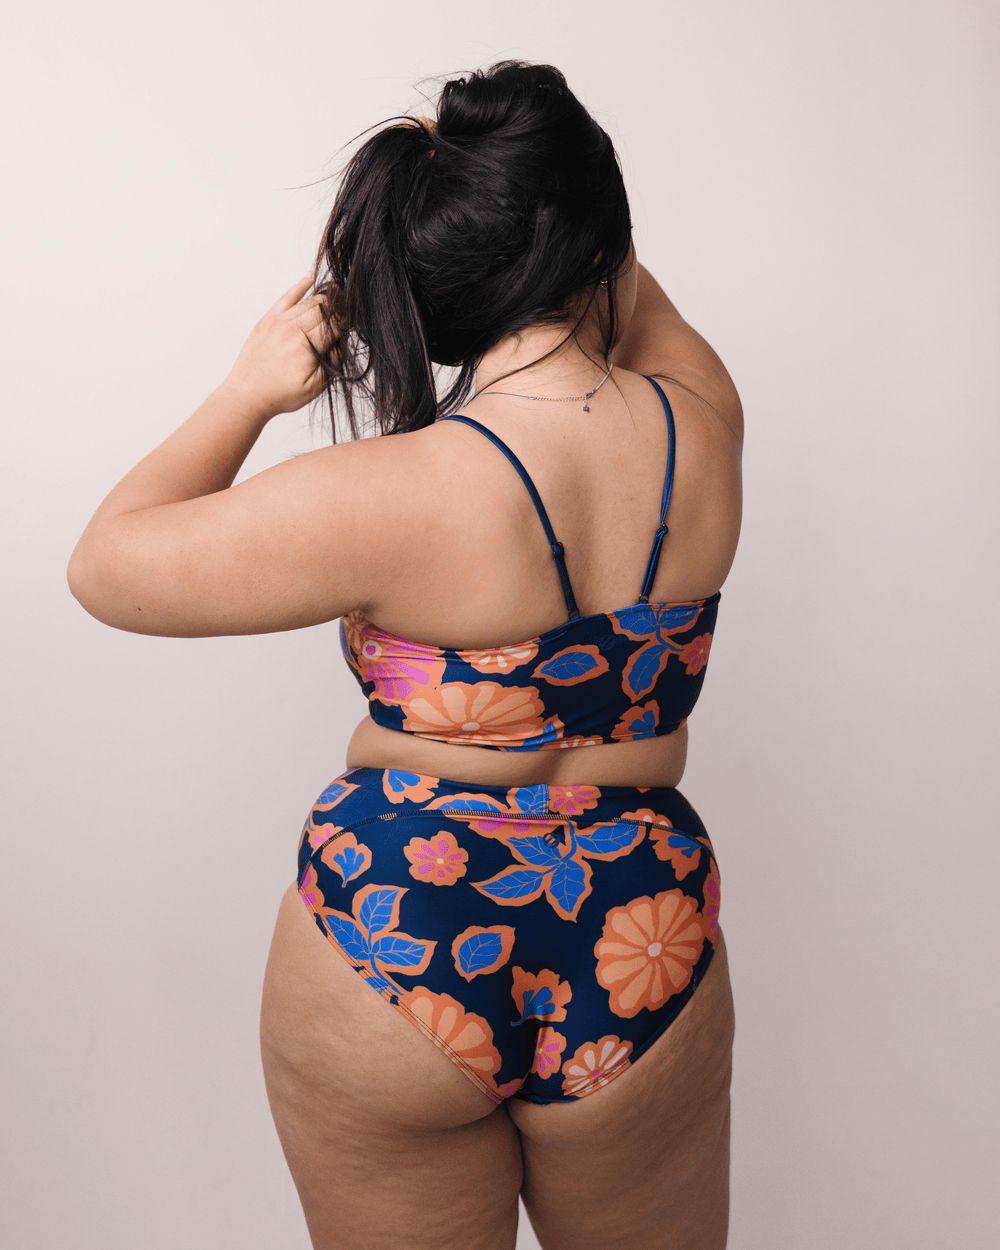 Back view studio image of bold floral patterned swimsuit bottoms.